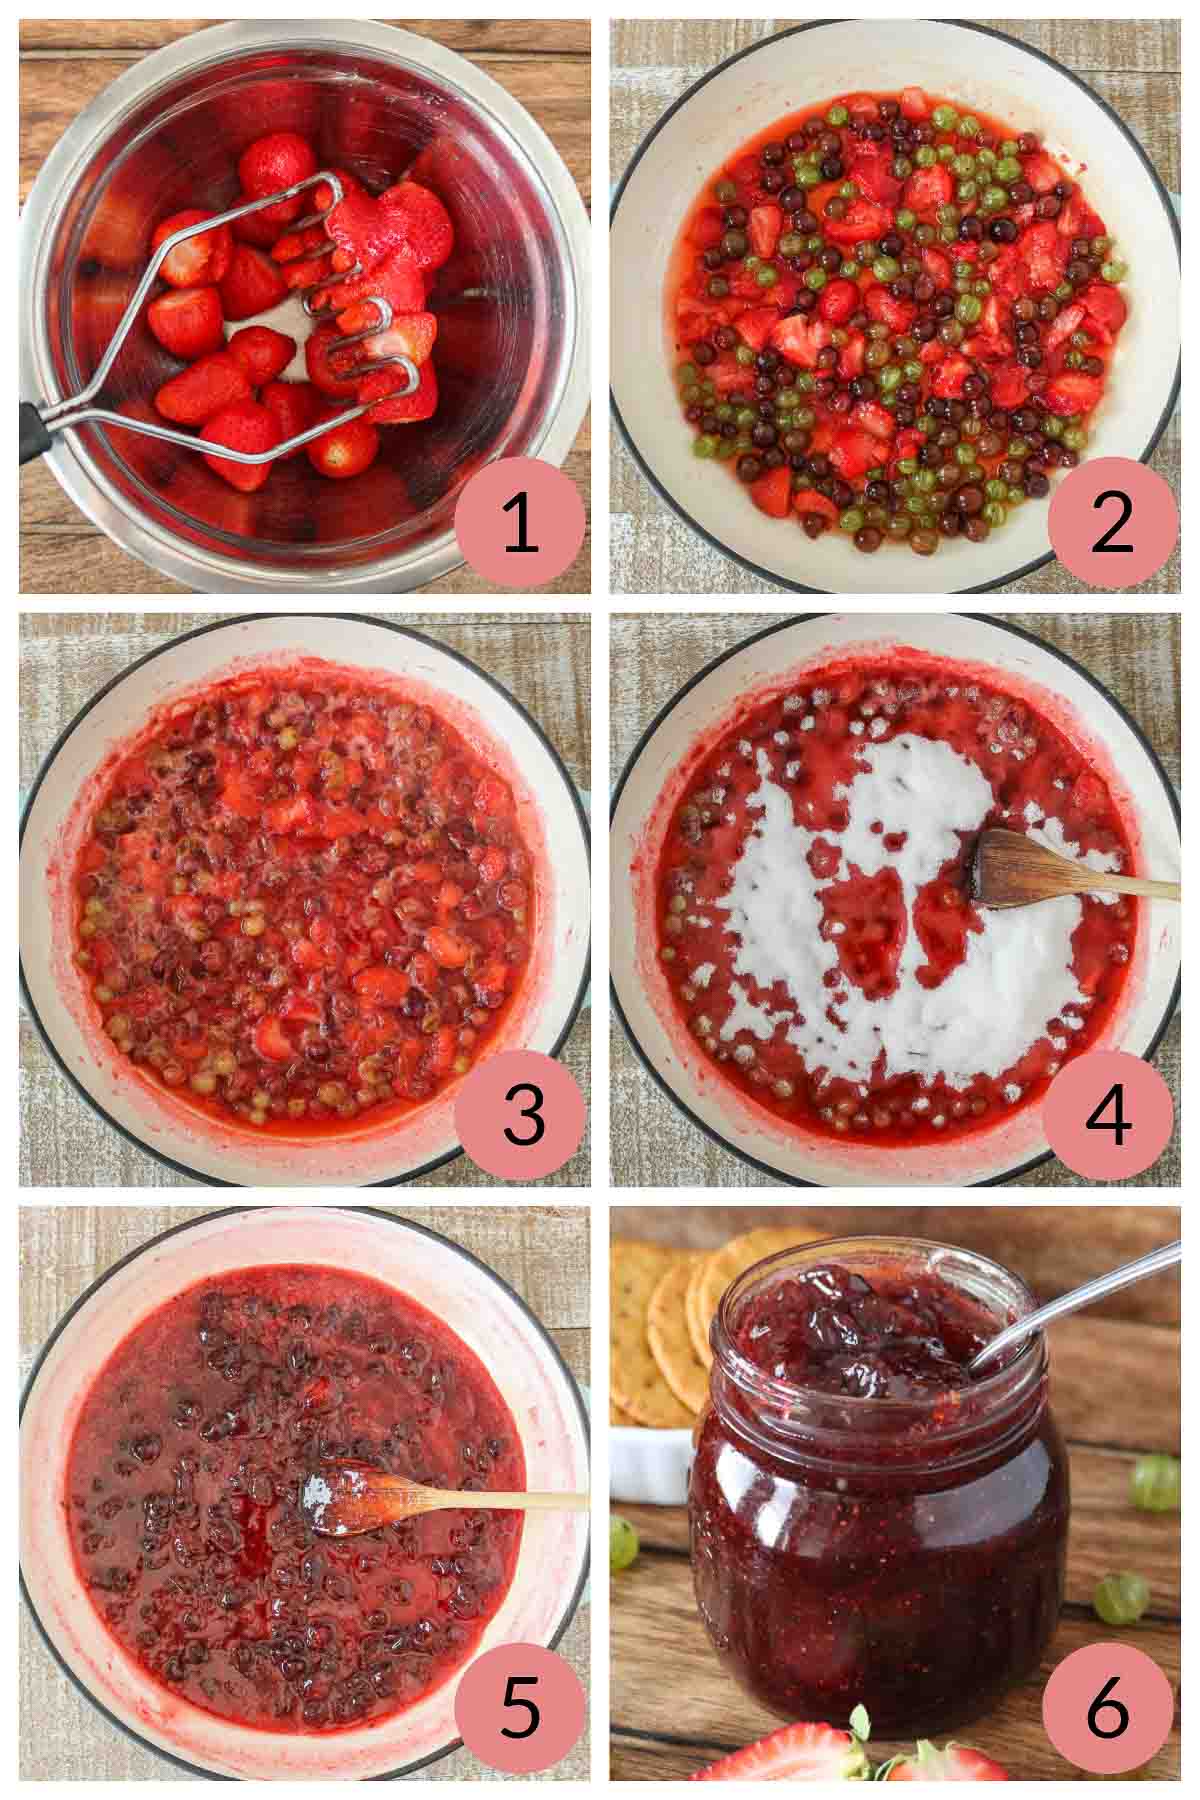 Collage of steps to make homemade jam with strawberries and gooseberries.